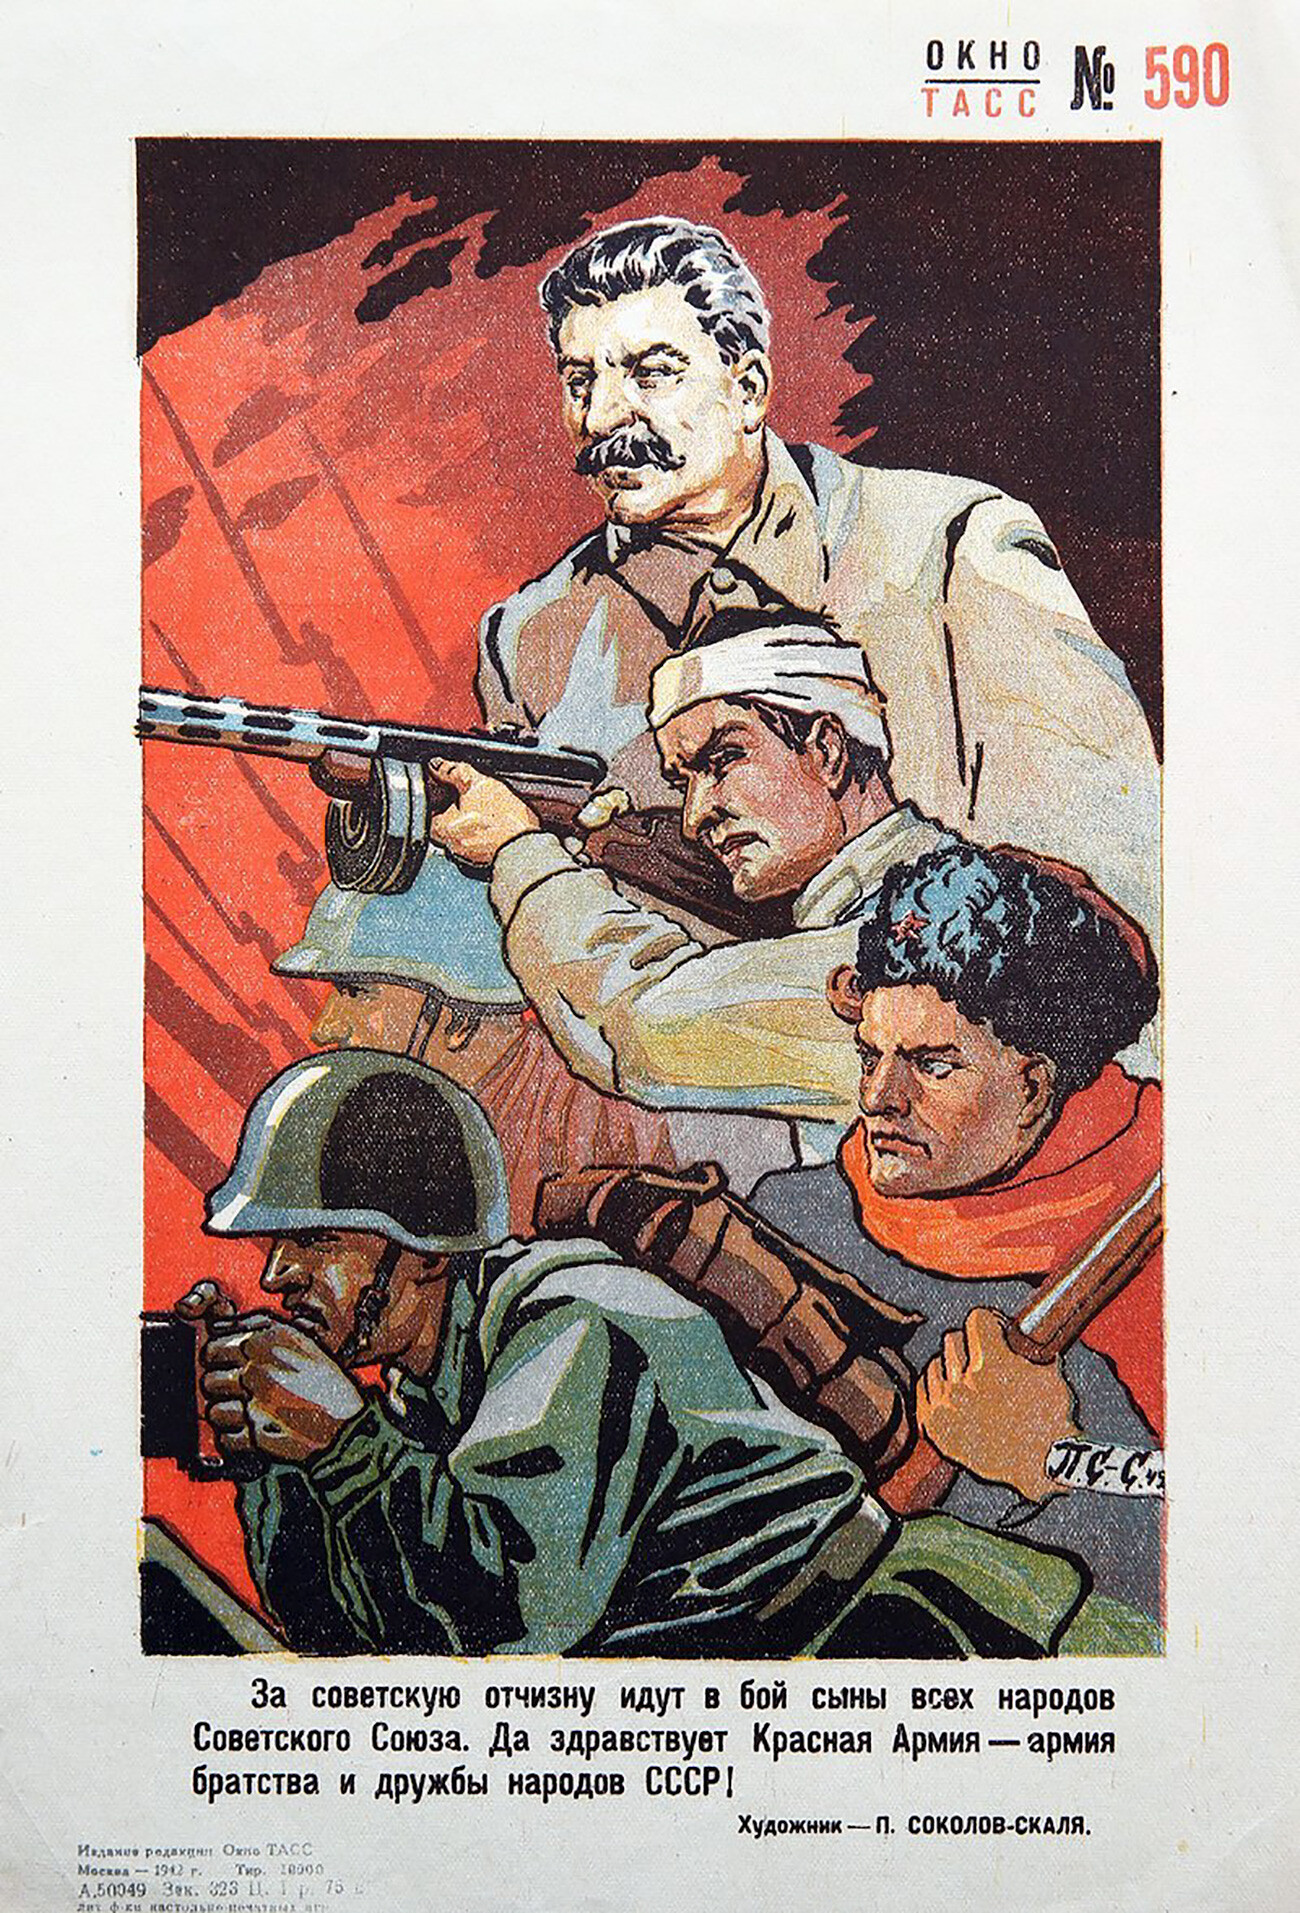 For the Soviet Fatherland, the sons of all nations of the Soviet Union go to battle. Hail the Red Army – the army of the brotherhood and friendship of the peoples of the USSR!